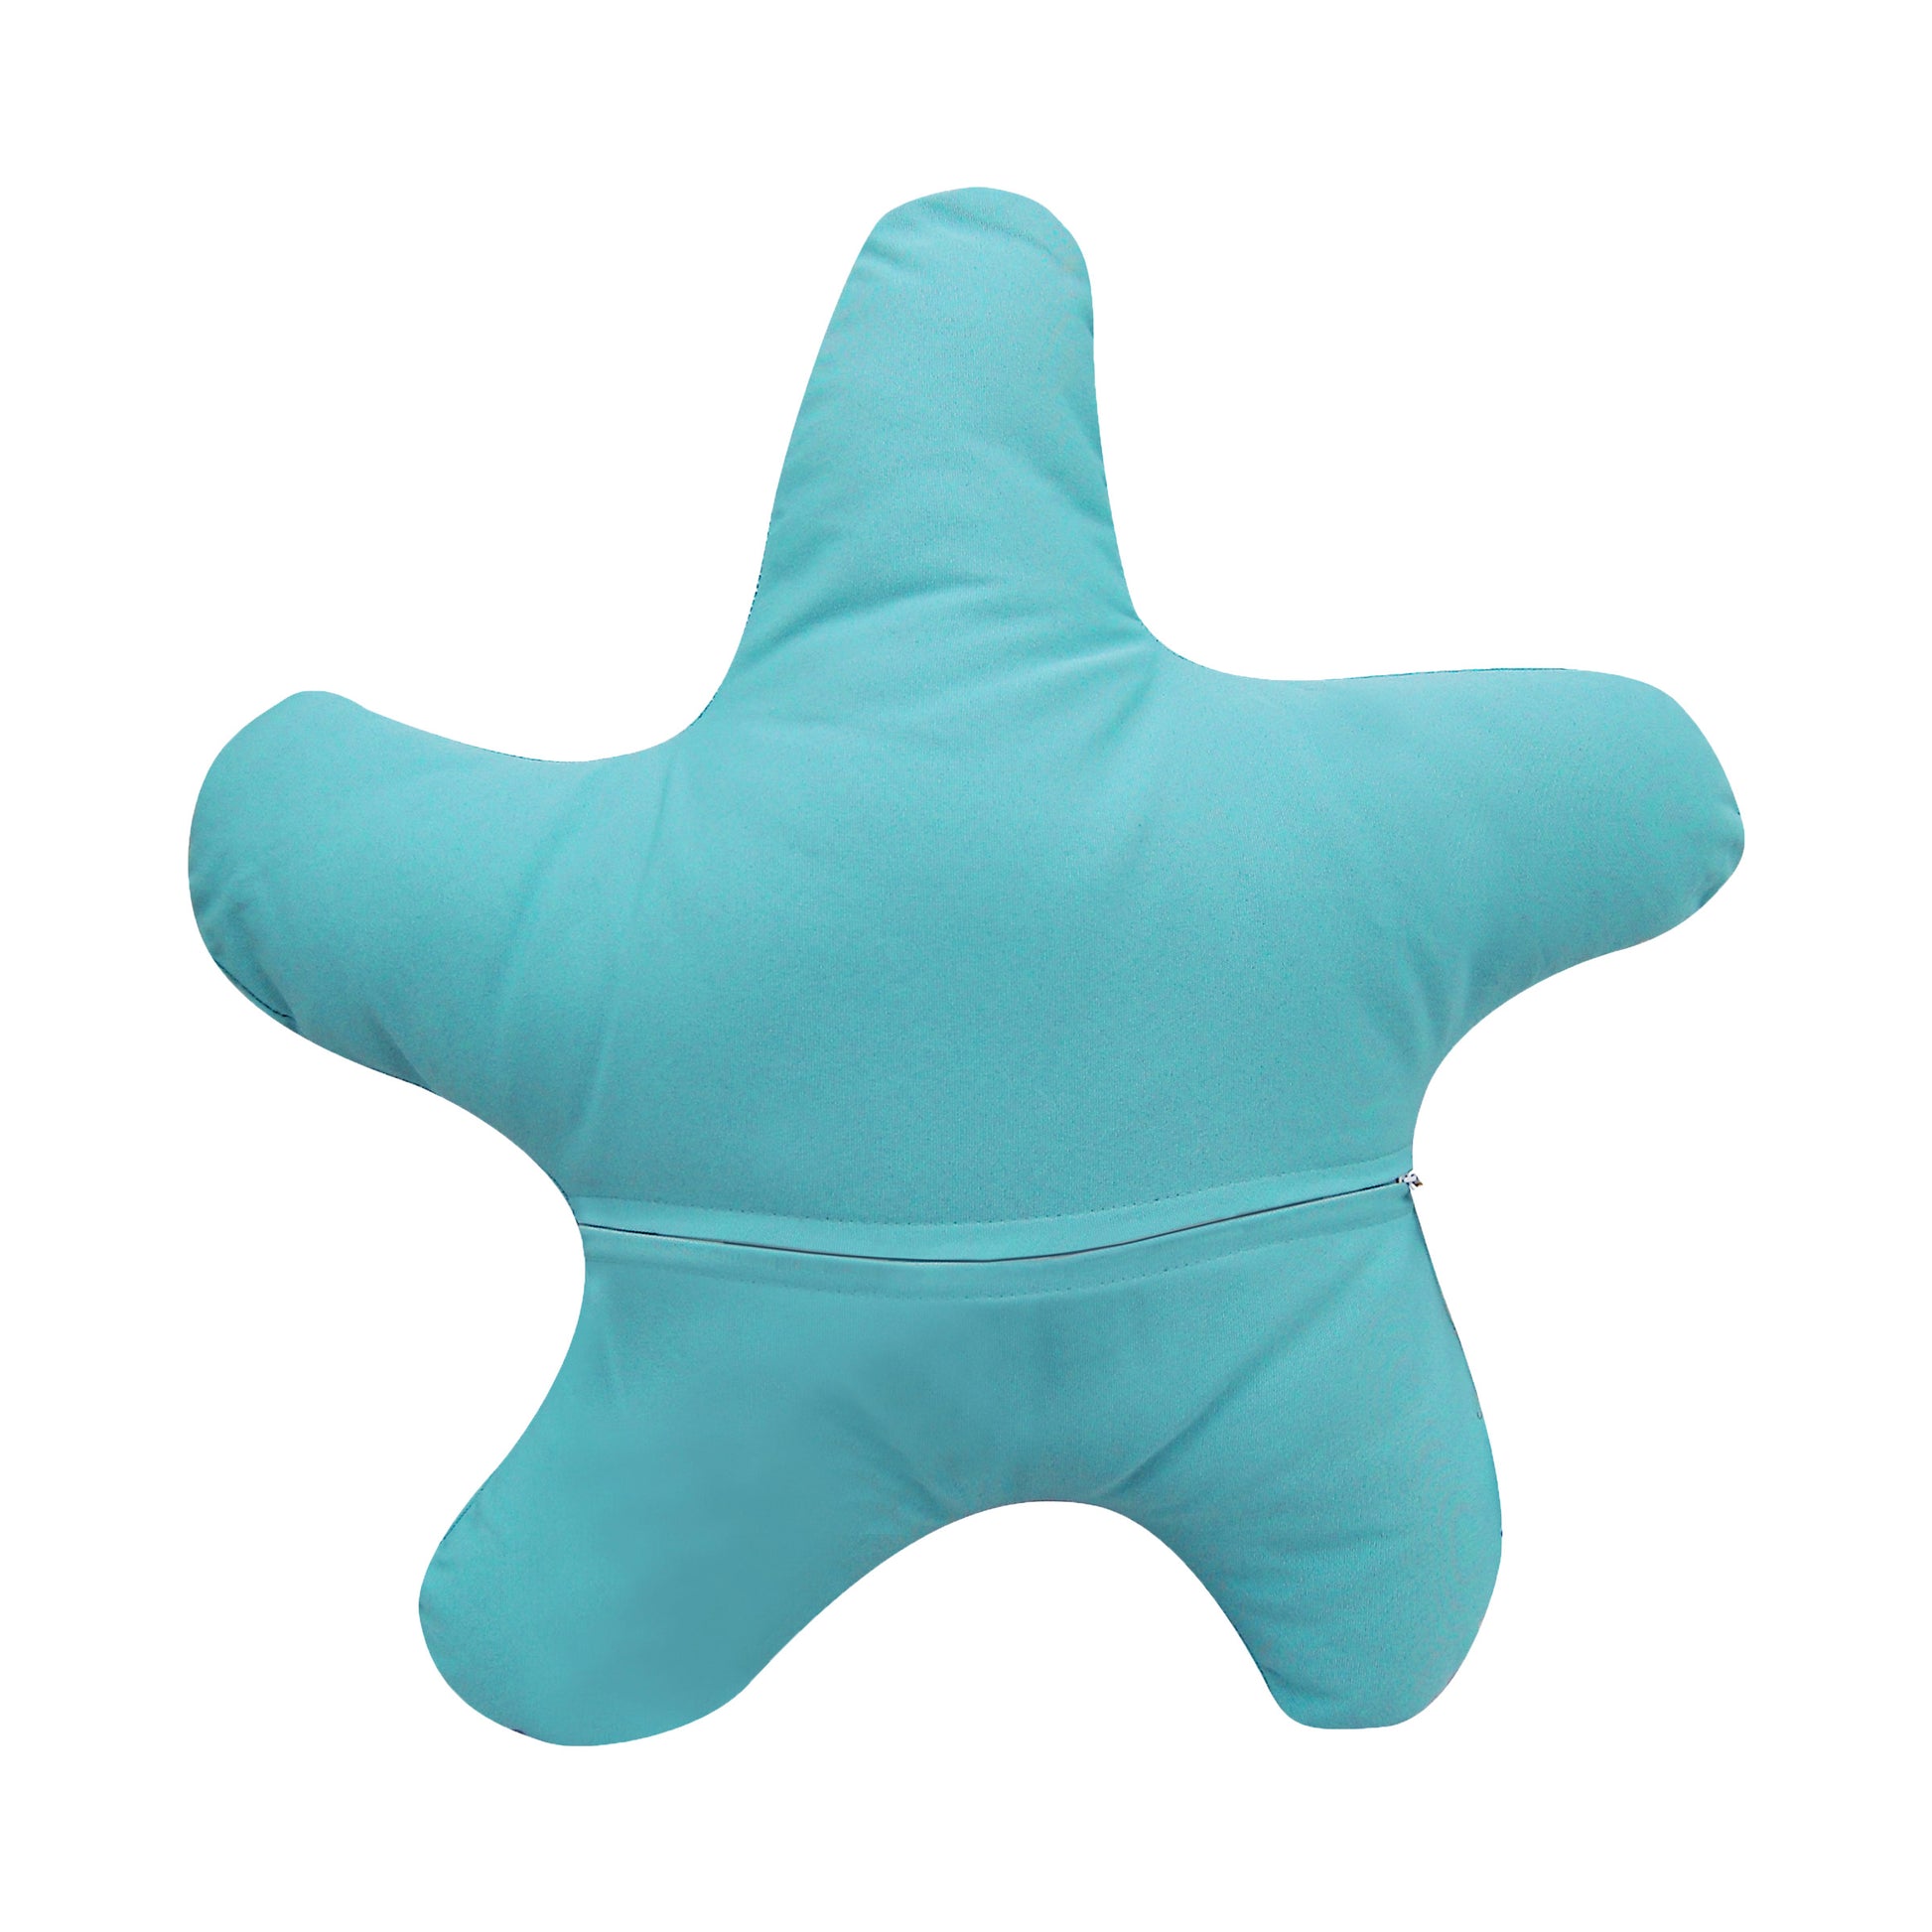 Solid turquoise fabric; back of the Turquoise Shaped Sea Star pillow with zipper enclosure.